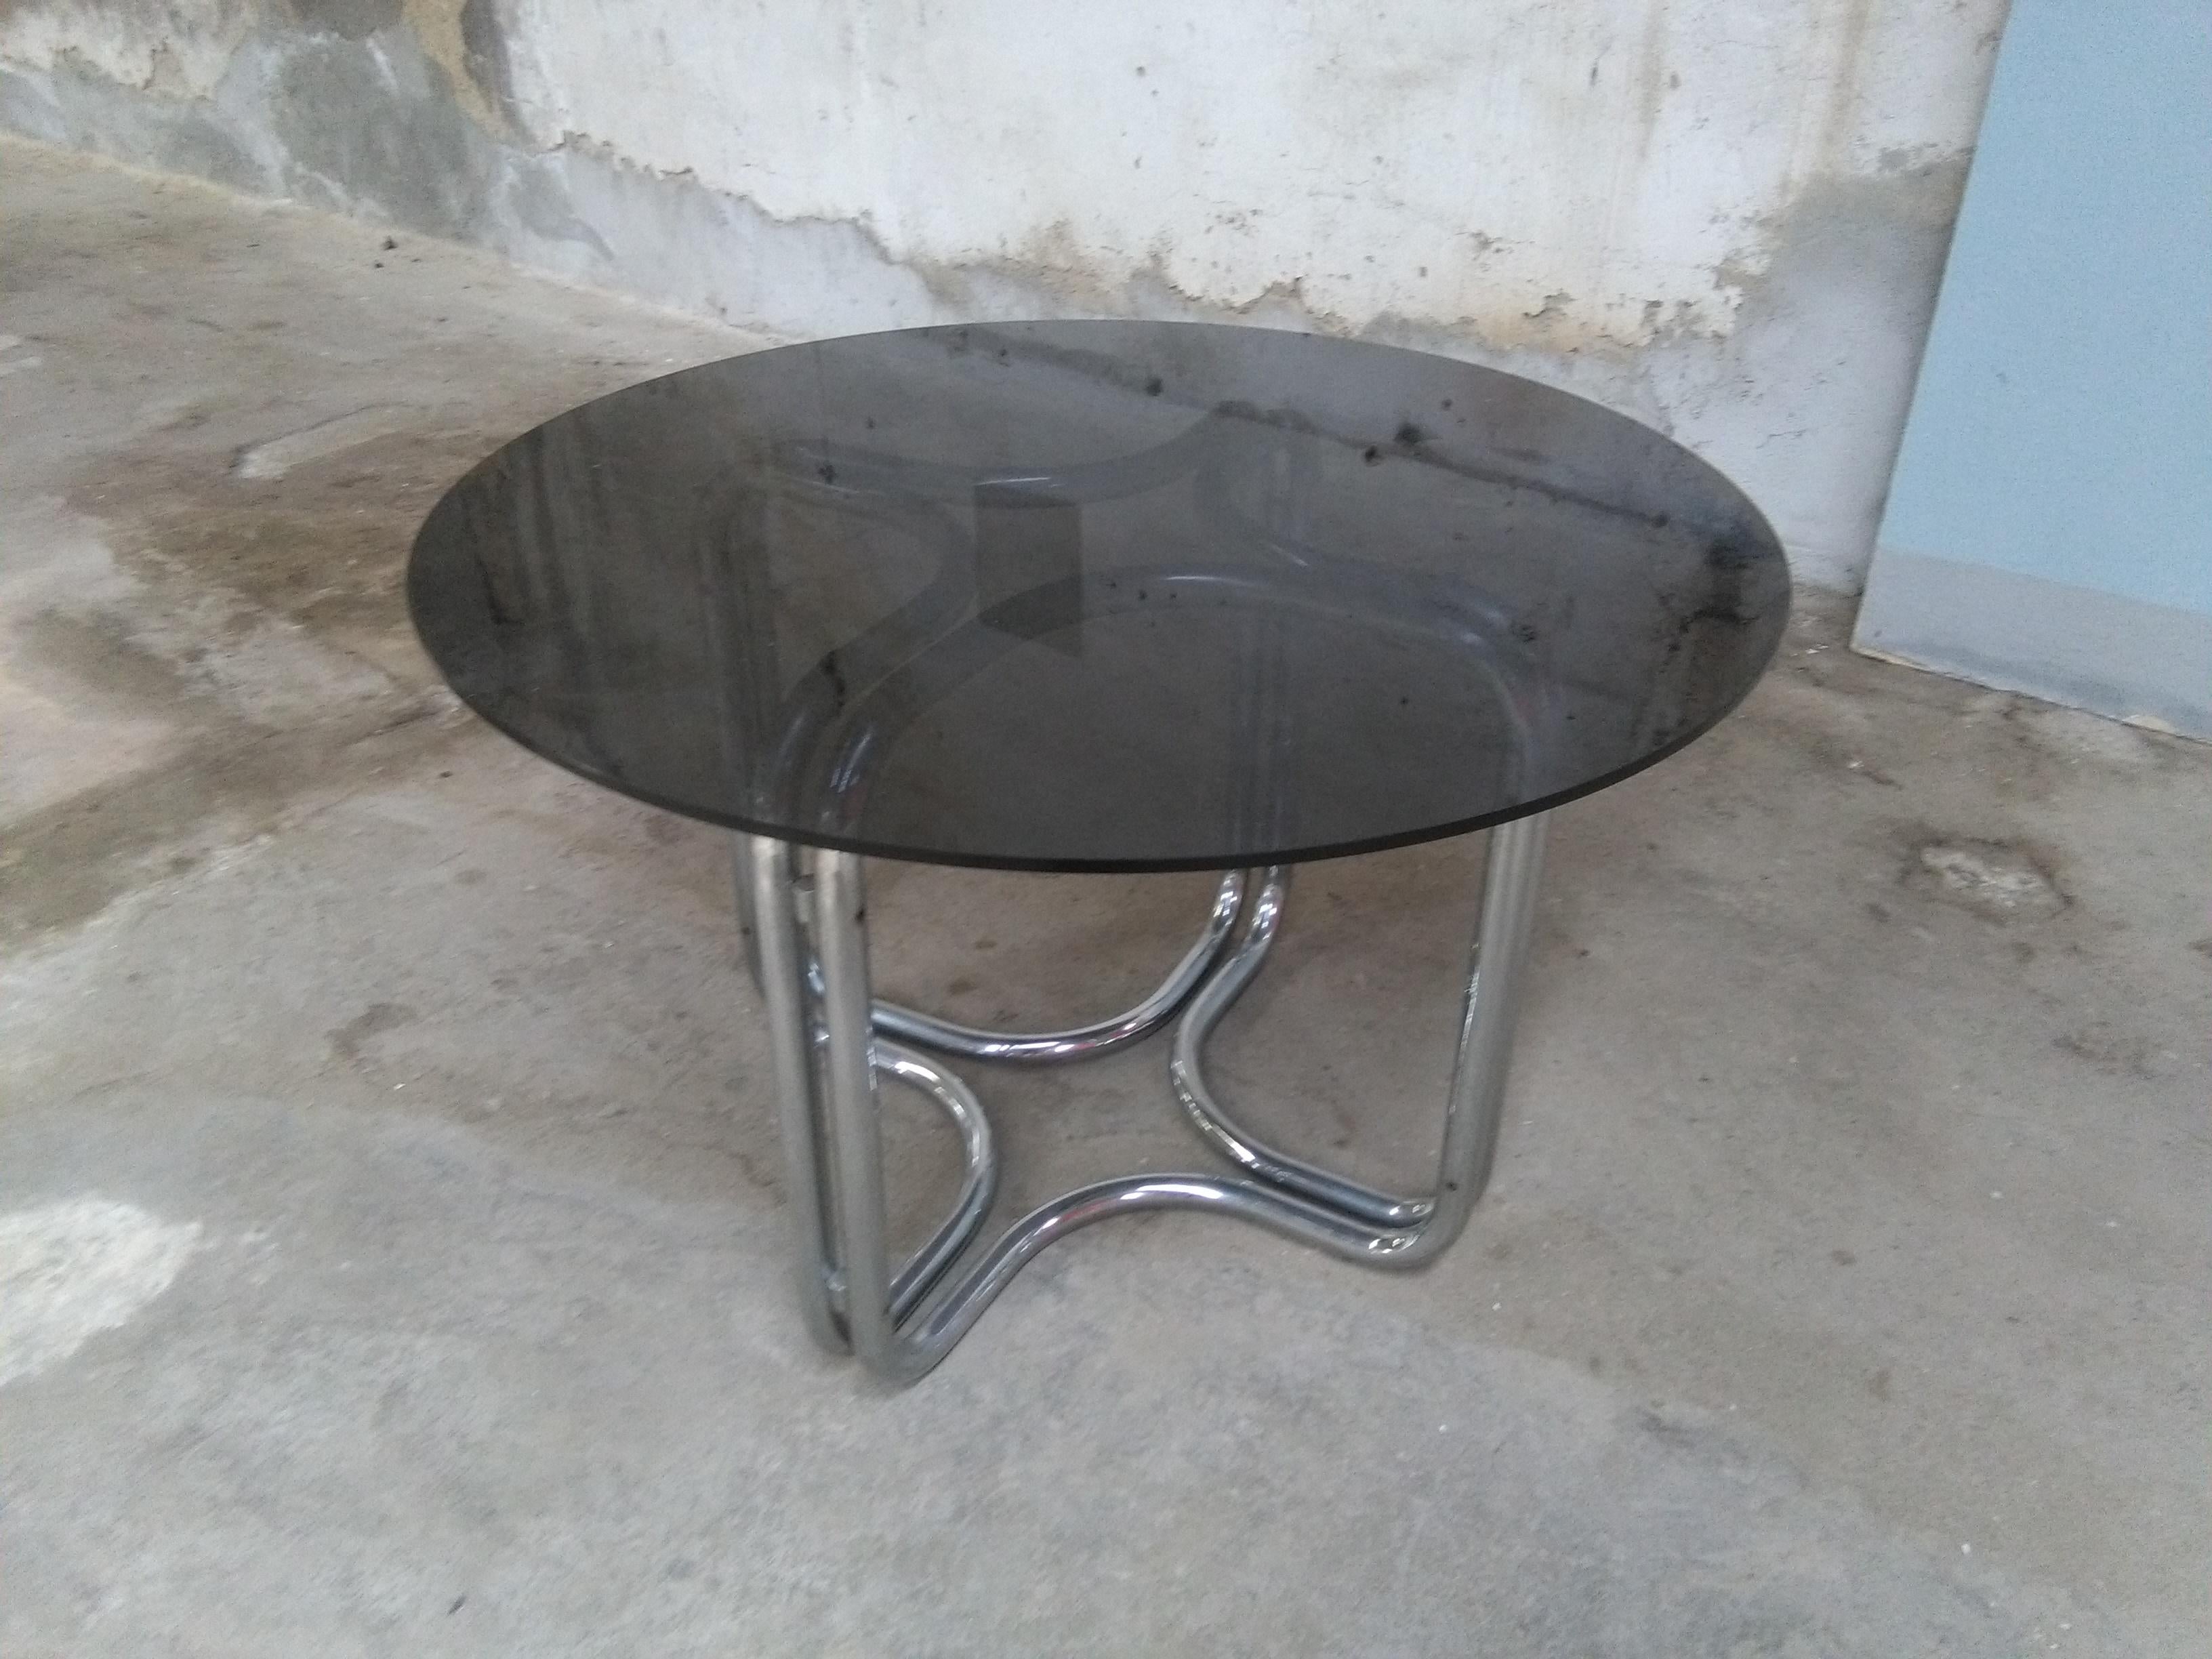 Mid-Century Modern Italian chrome round dining or center table with smoked glass top by Giotto Stoppino.
The table is in very good vintage conditions. Wear consistent with age and use.